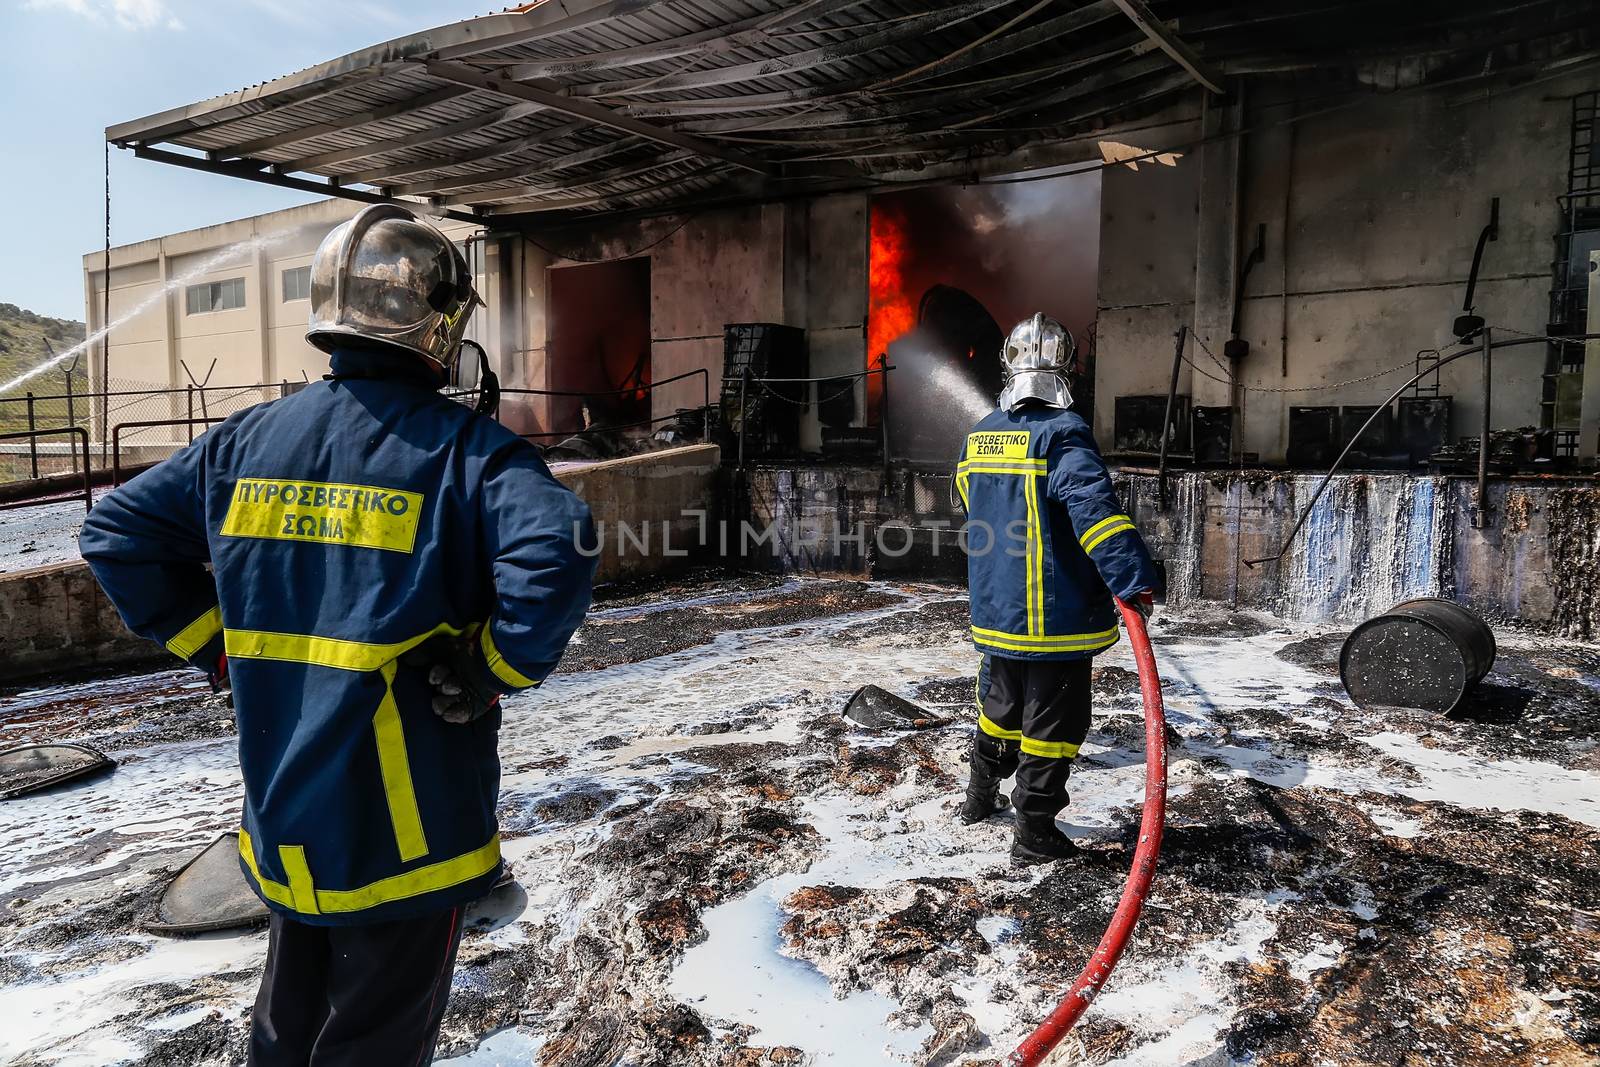 Aspopirgos, Greece - March 28, 2016: Firefighters struggle to extinguish the fire that broke out at a paint factory